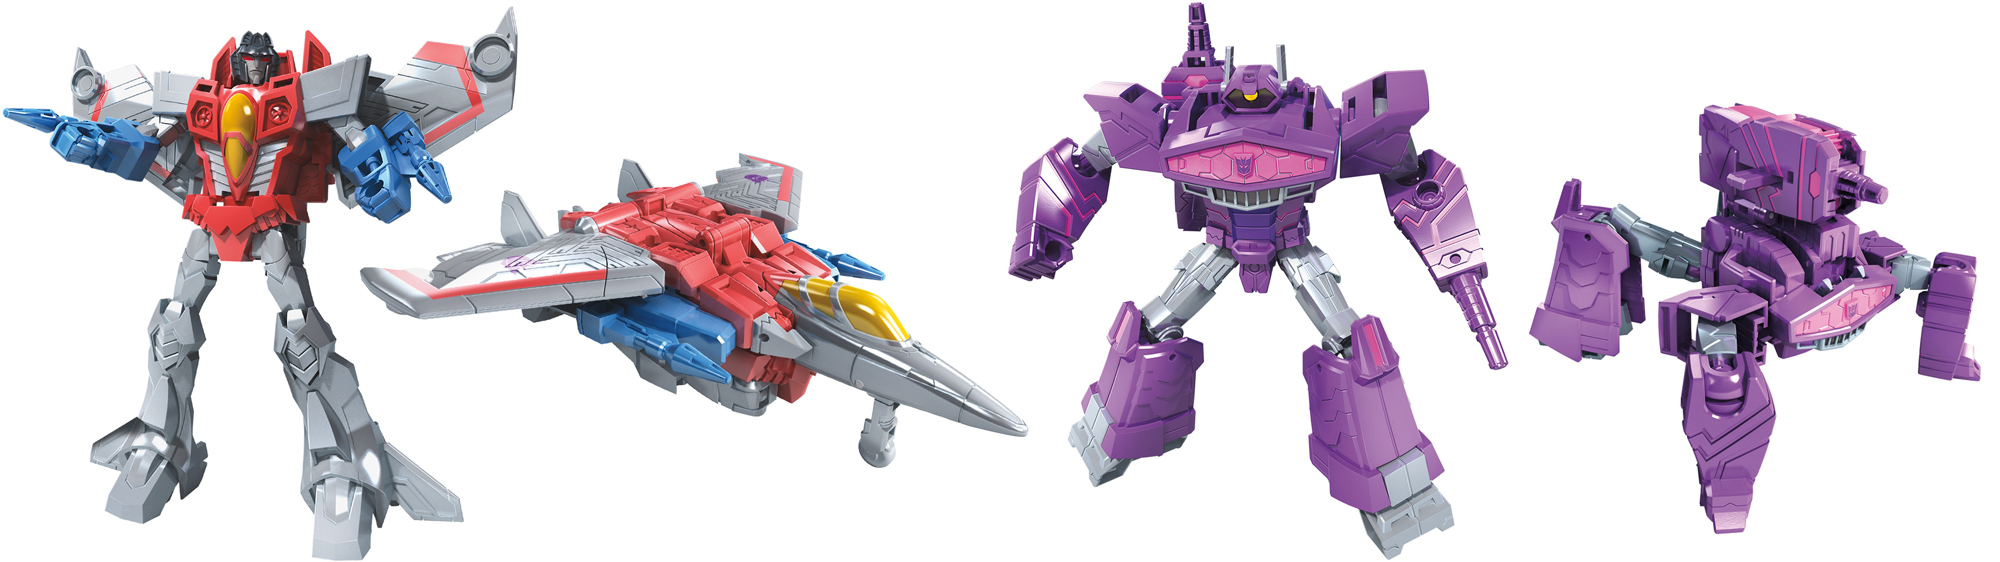 These New Transformers Cyberverse Figures Are Fantastic Callbacks To The Original ’80s Toys